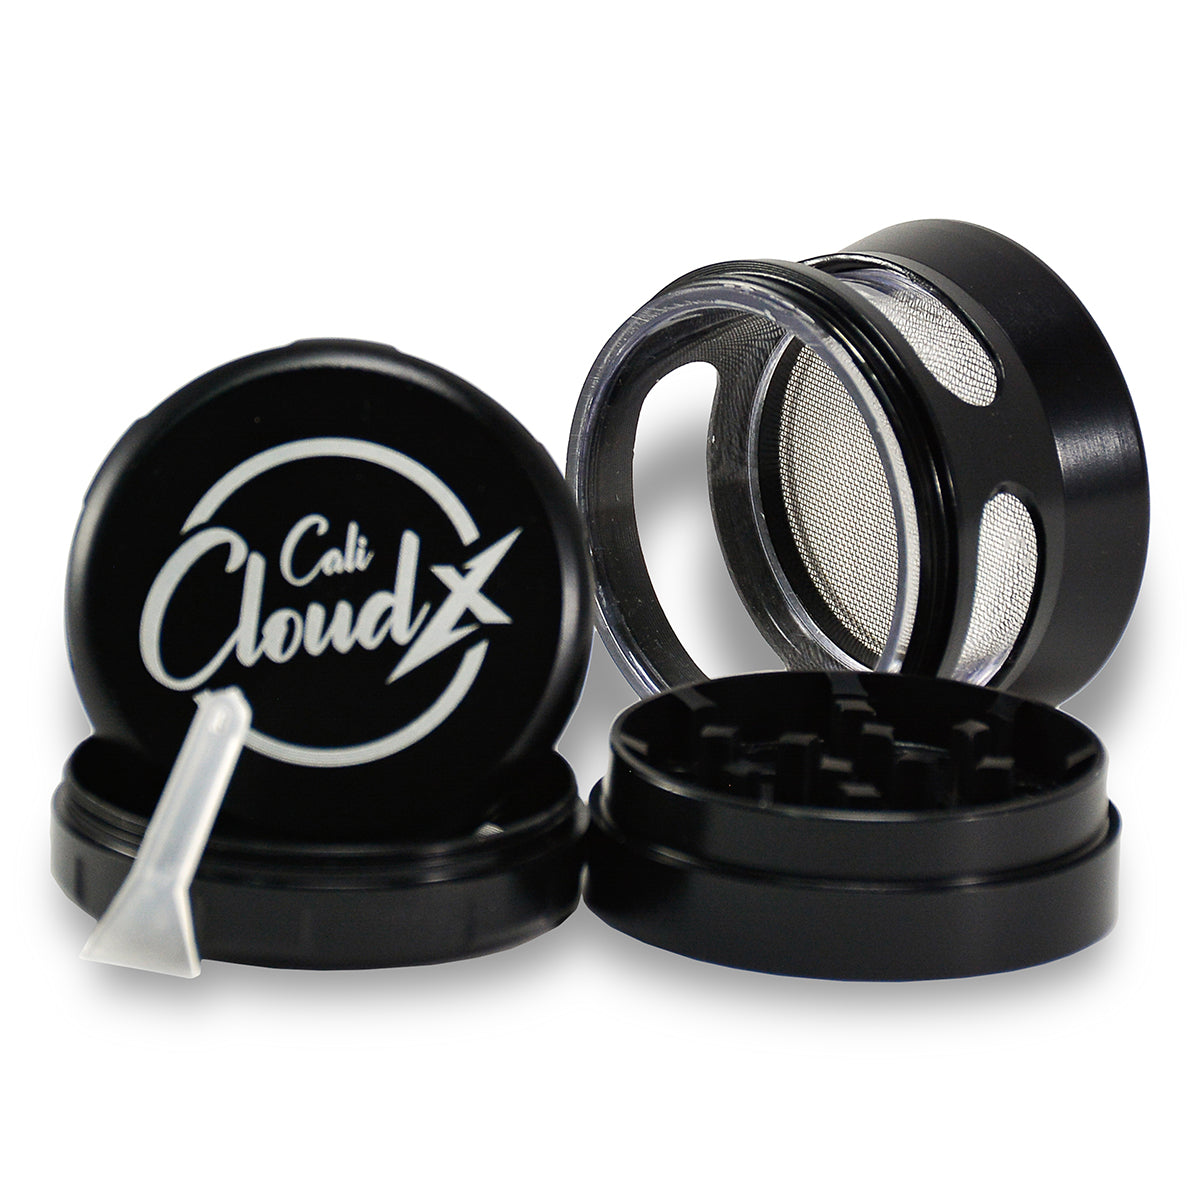 Cali Cloudx See through Glass Light Weight 4 Parts Color Grinder- 50mm